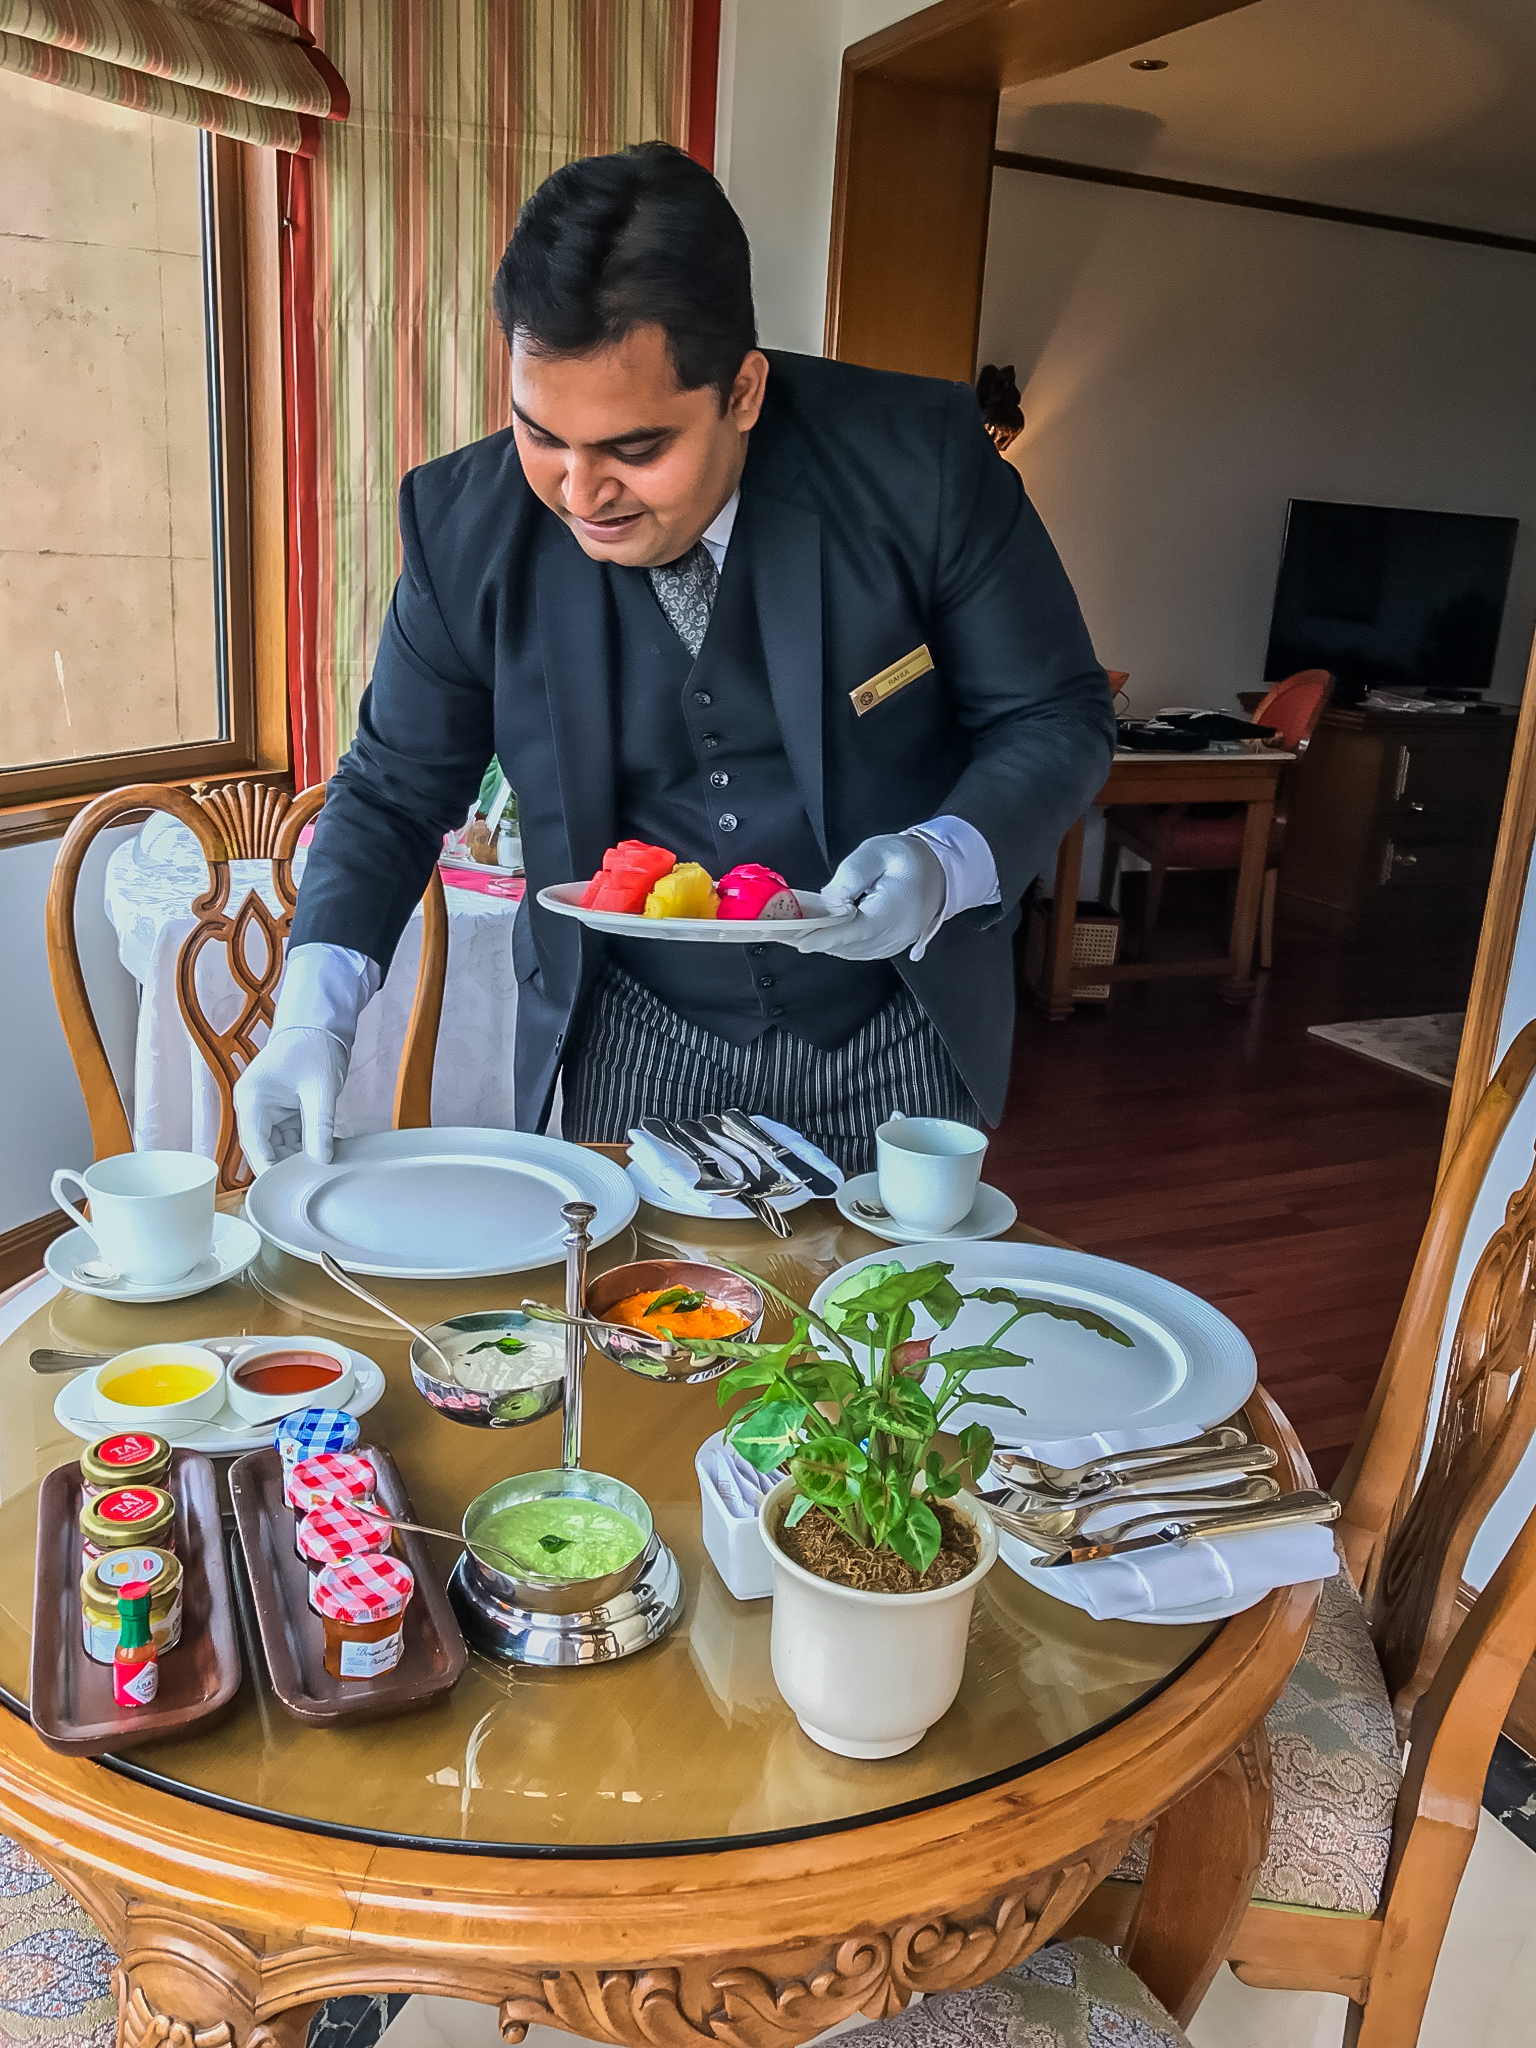  The amazing white gloved butler breakfast service at the Taj Hotel 